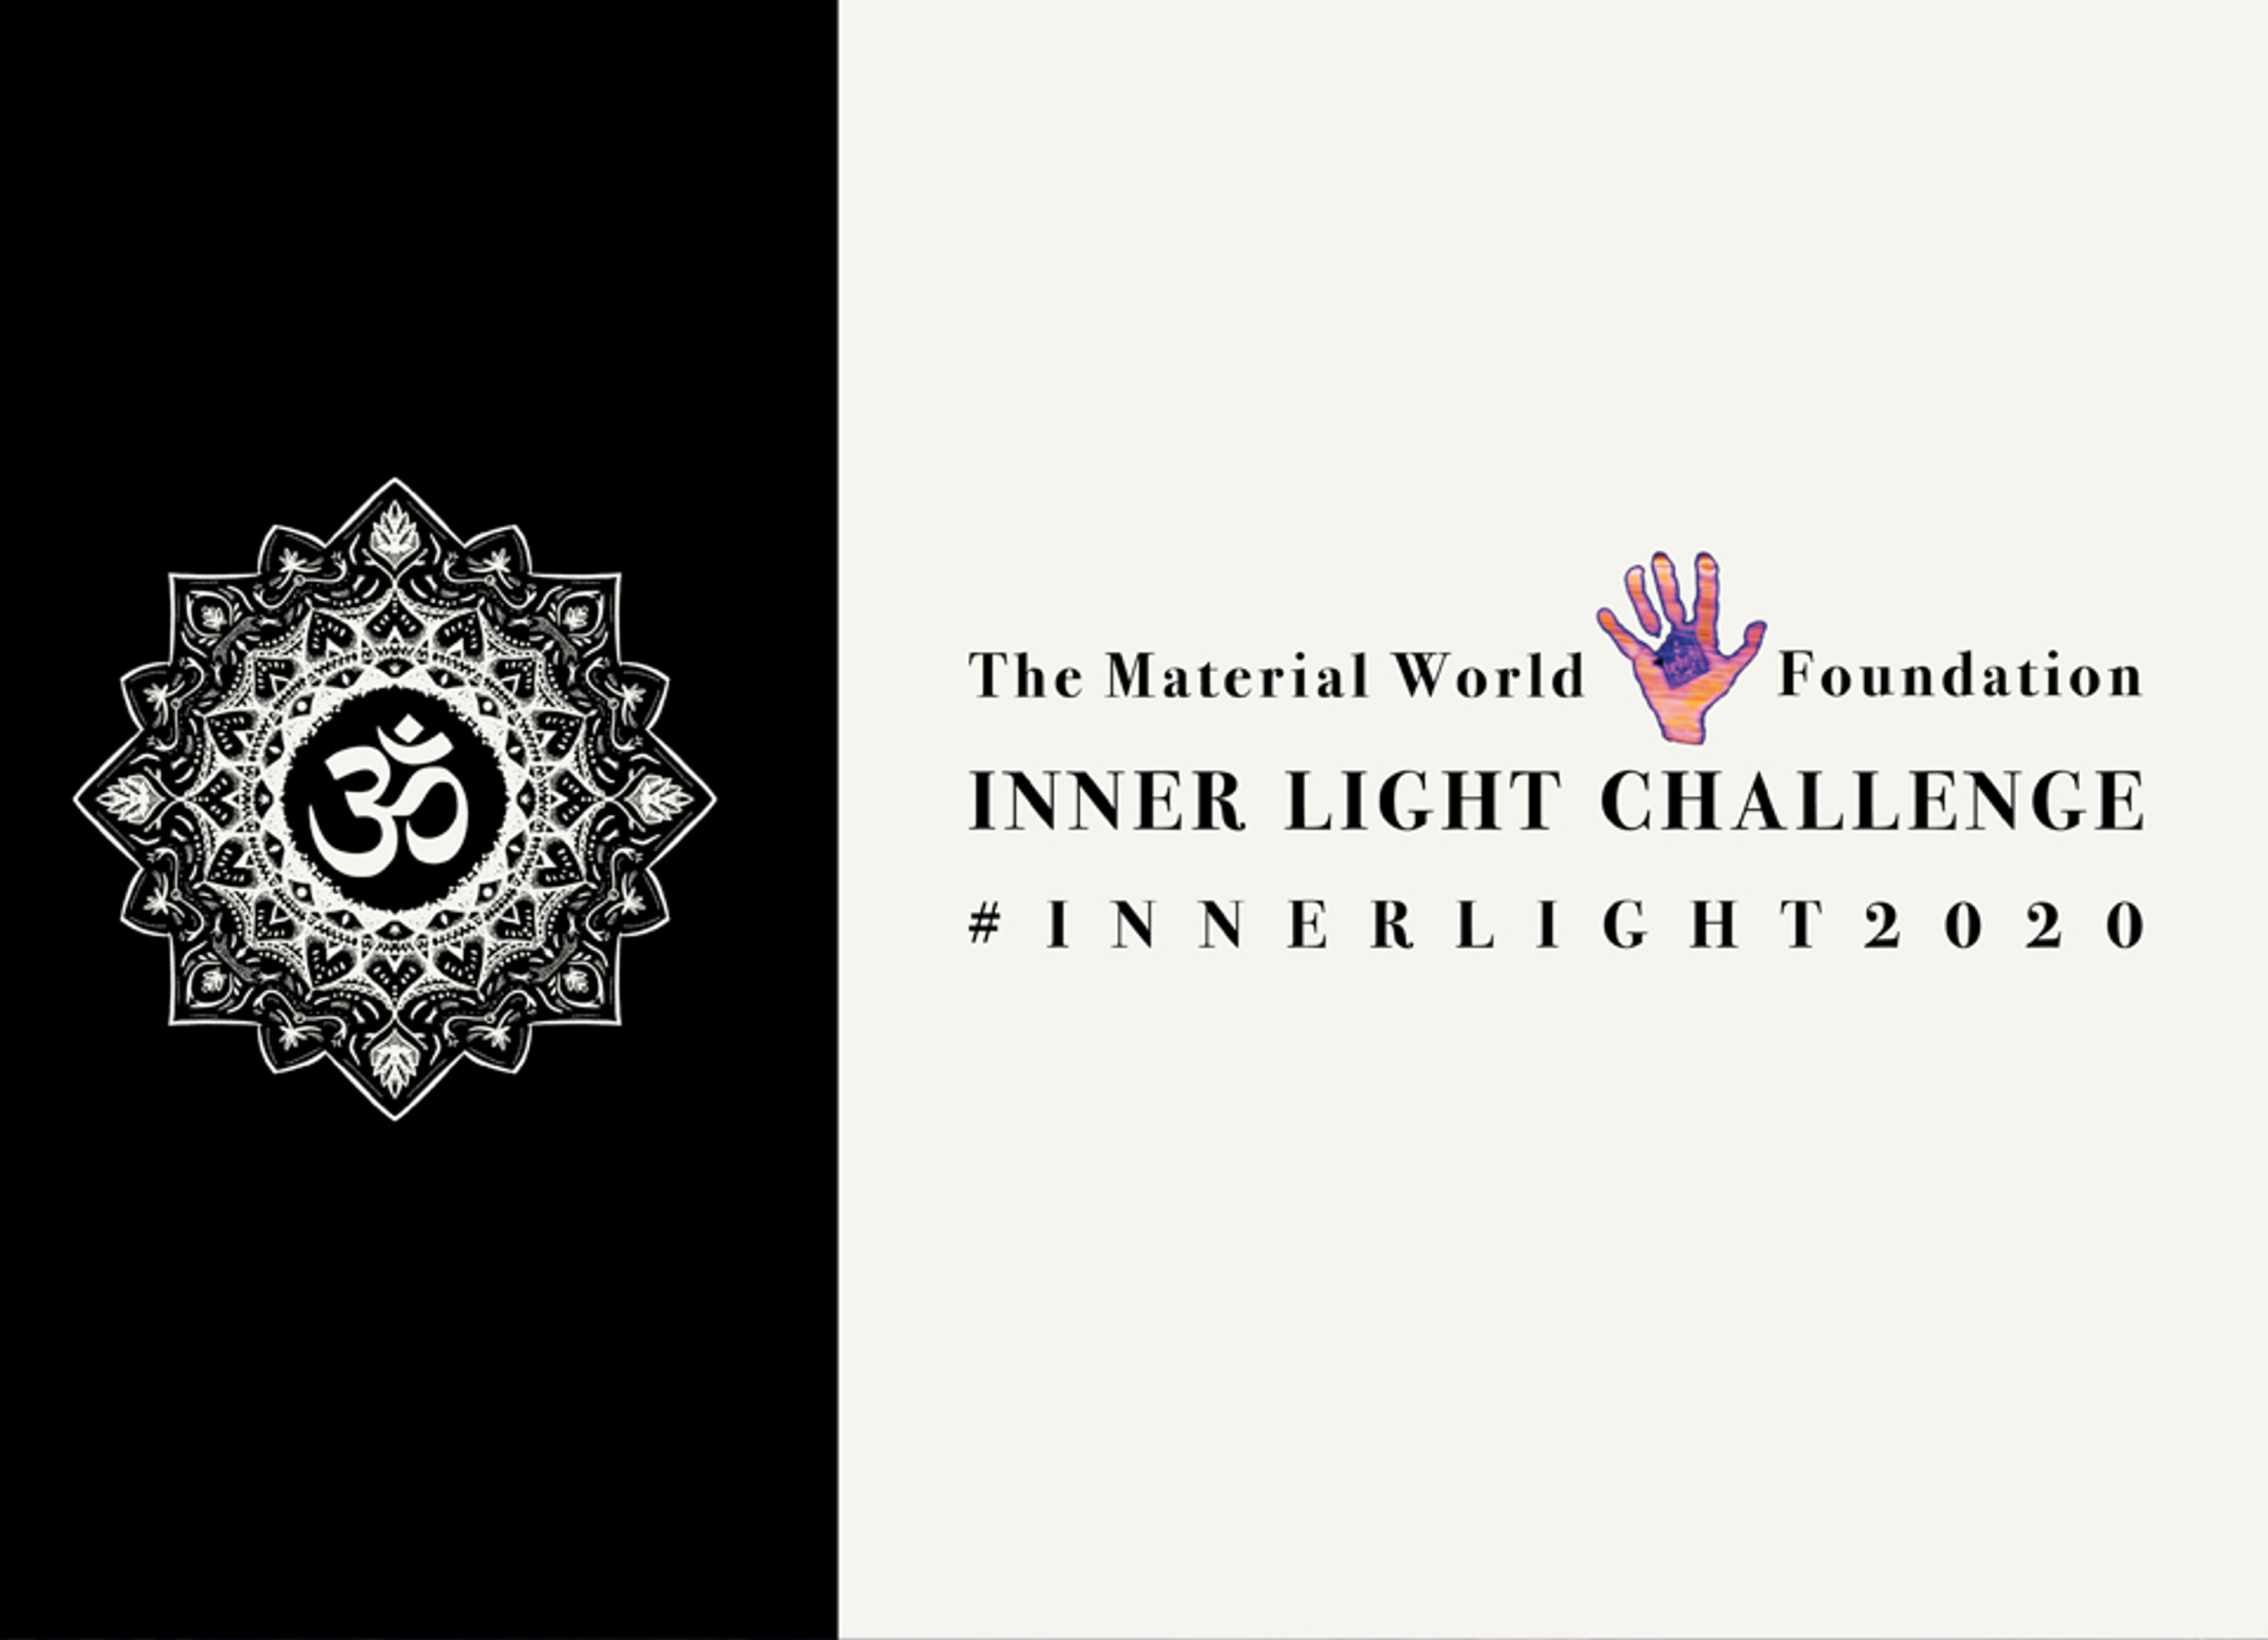 #innerlight2020 in support of The Material World Foundation